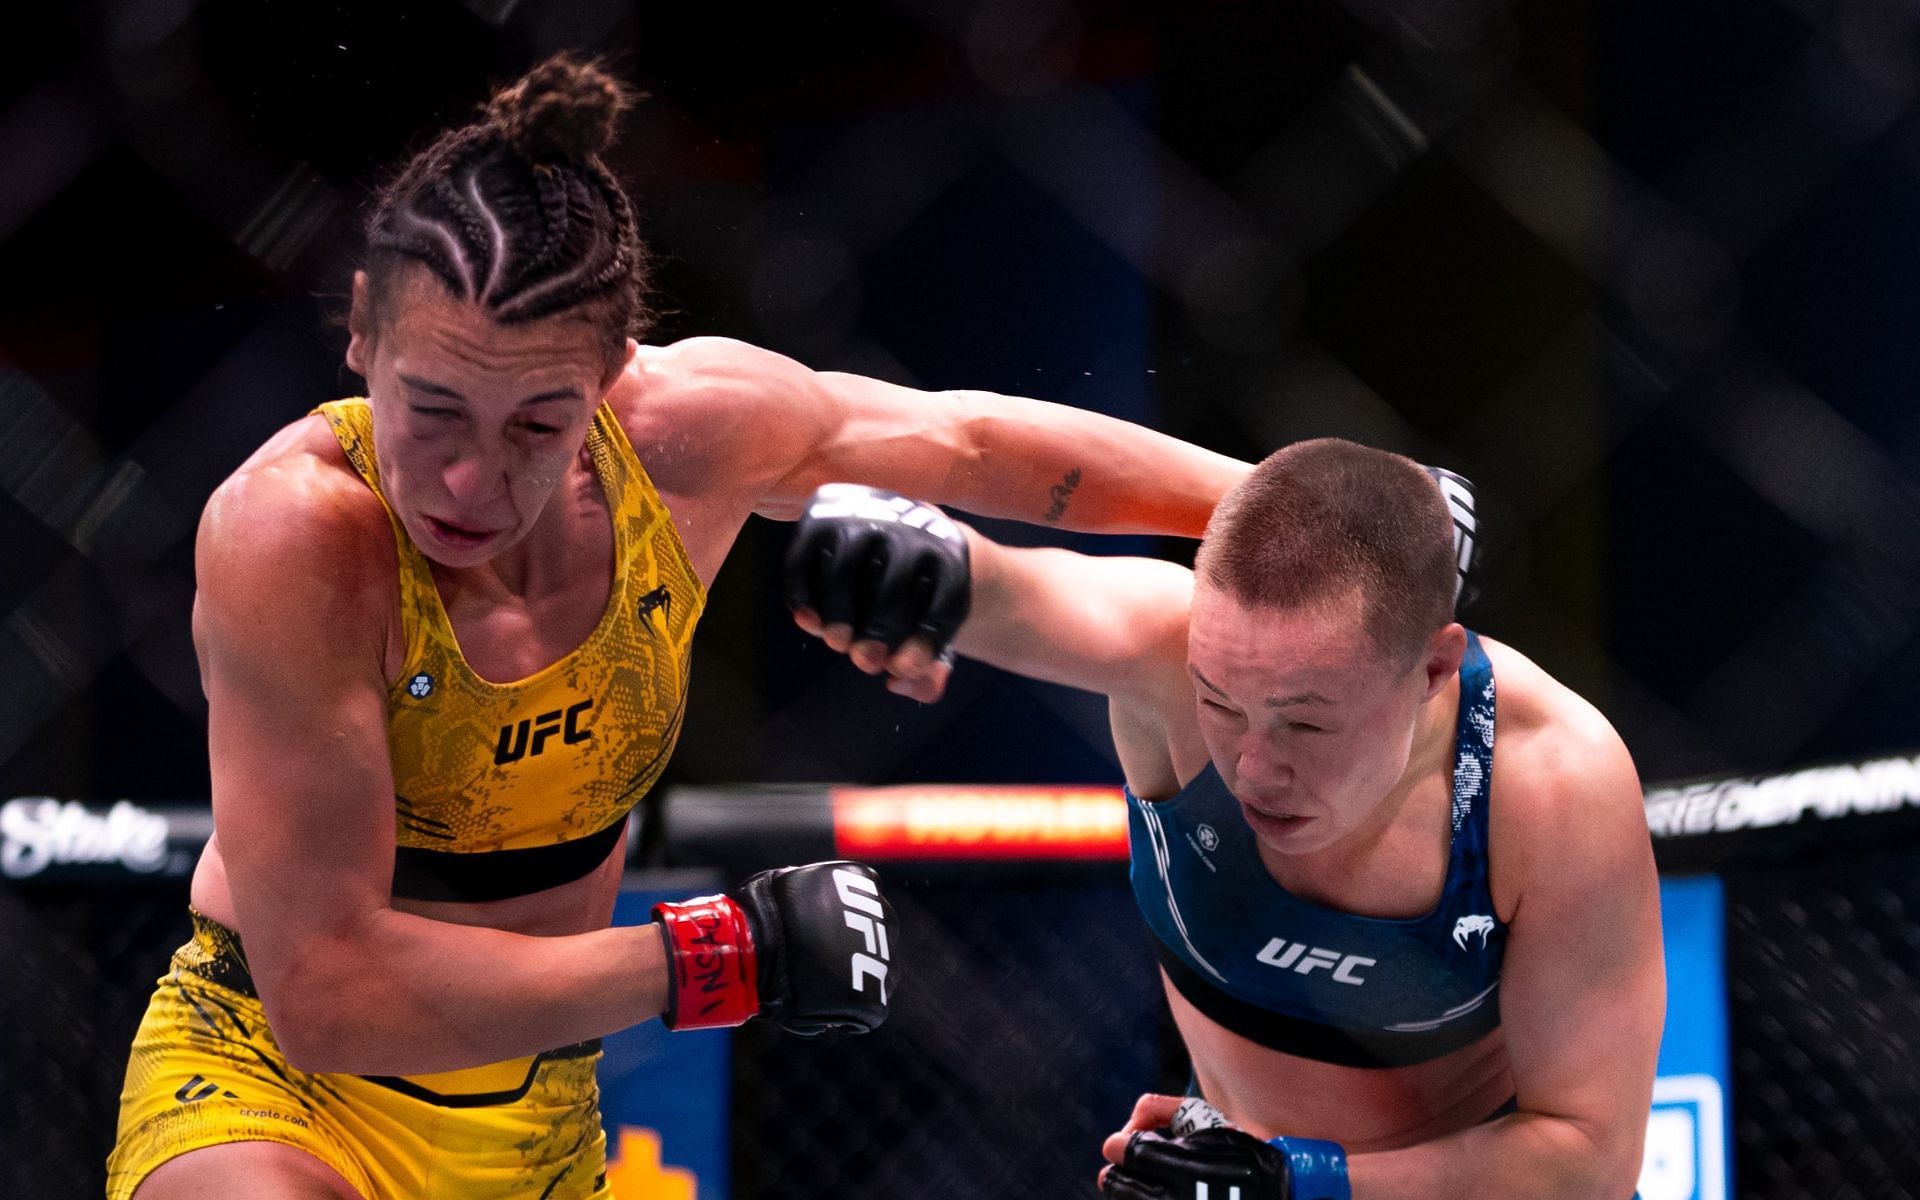 Following her win last night, who is next for Rose Namajunas?